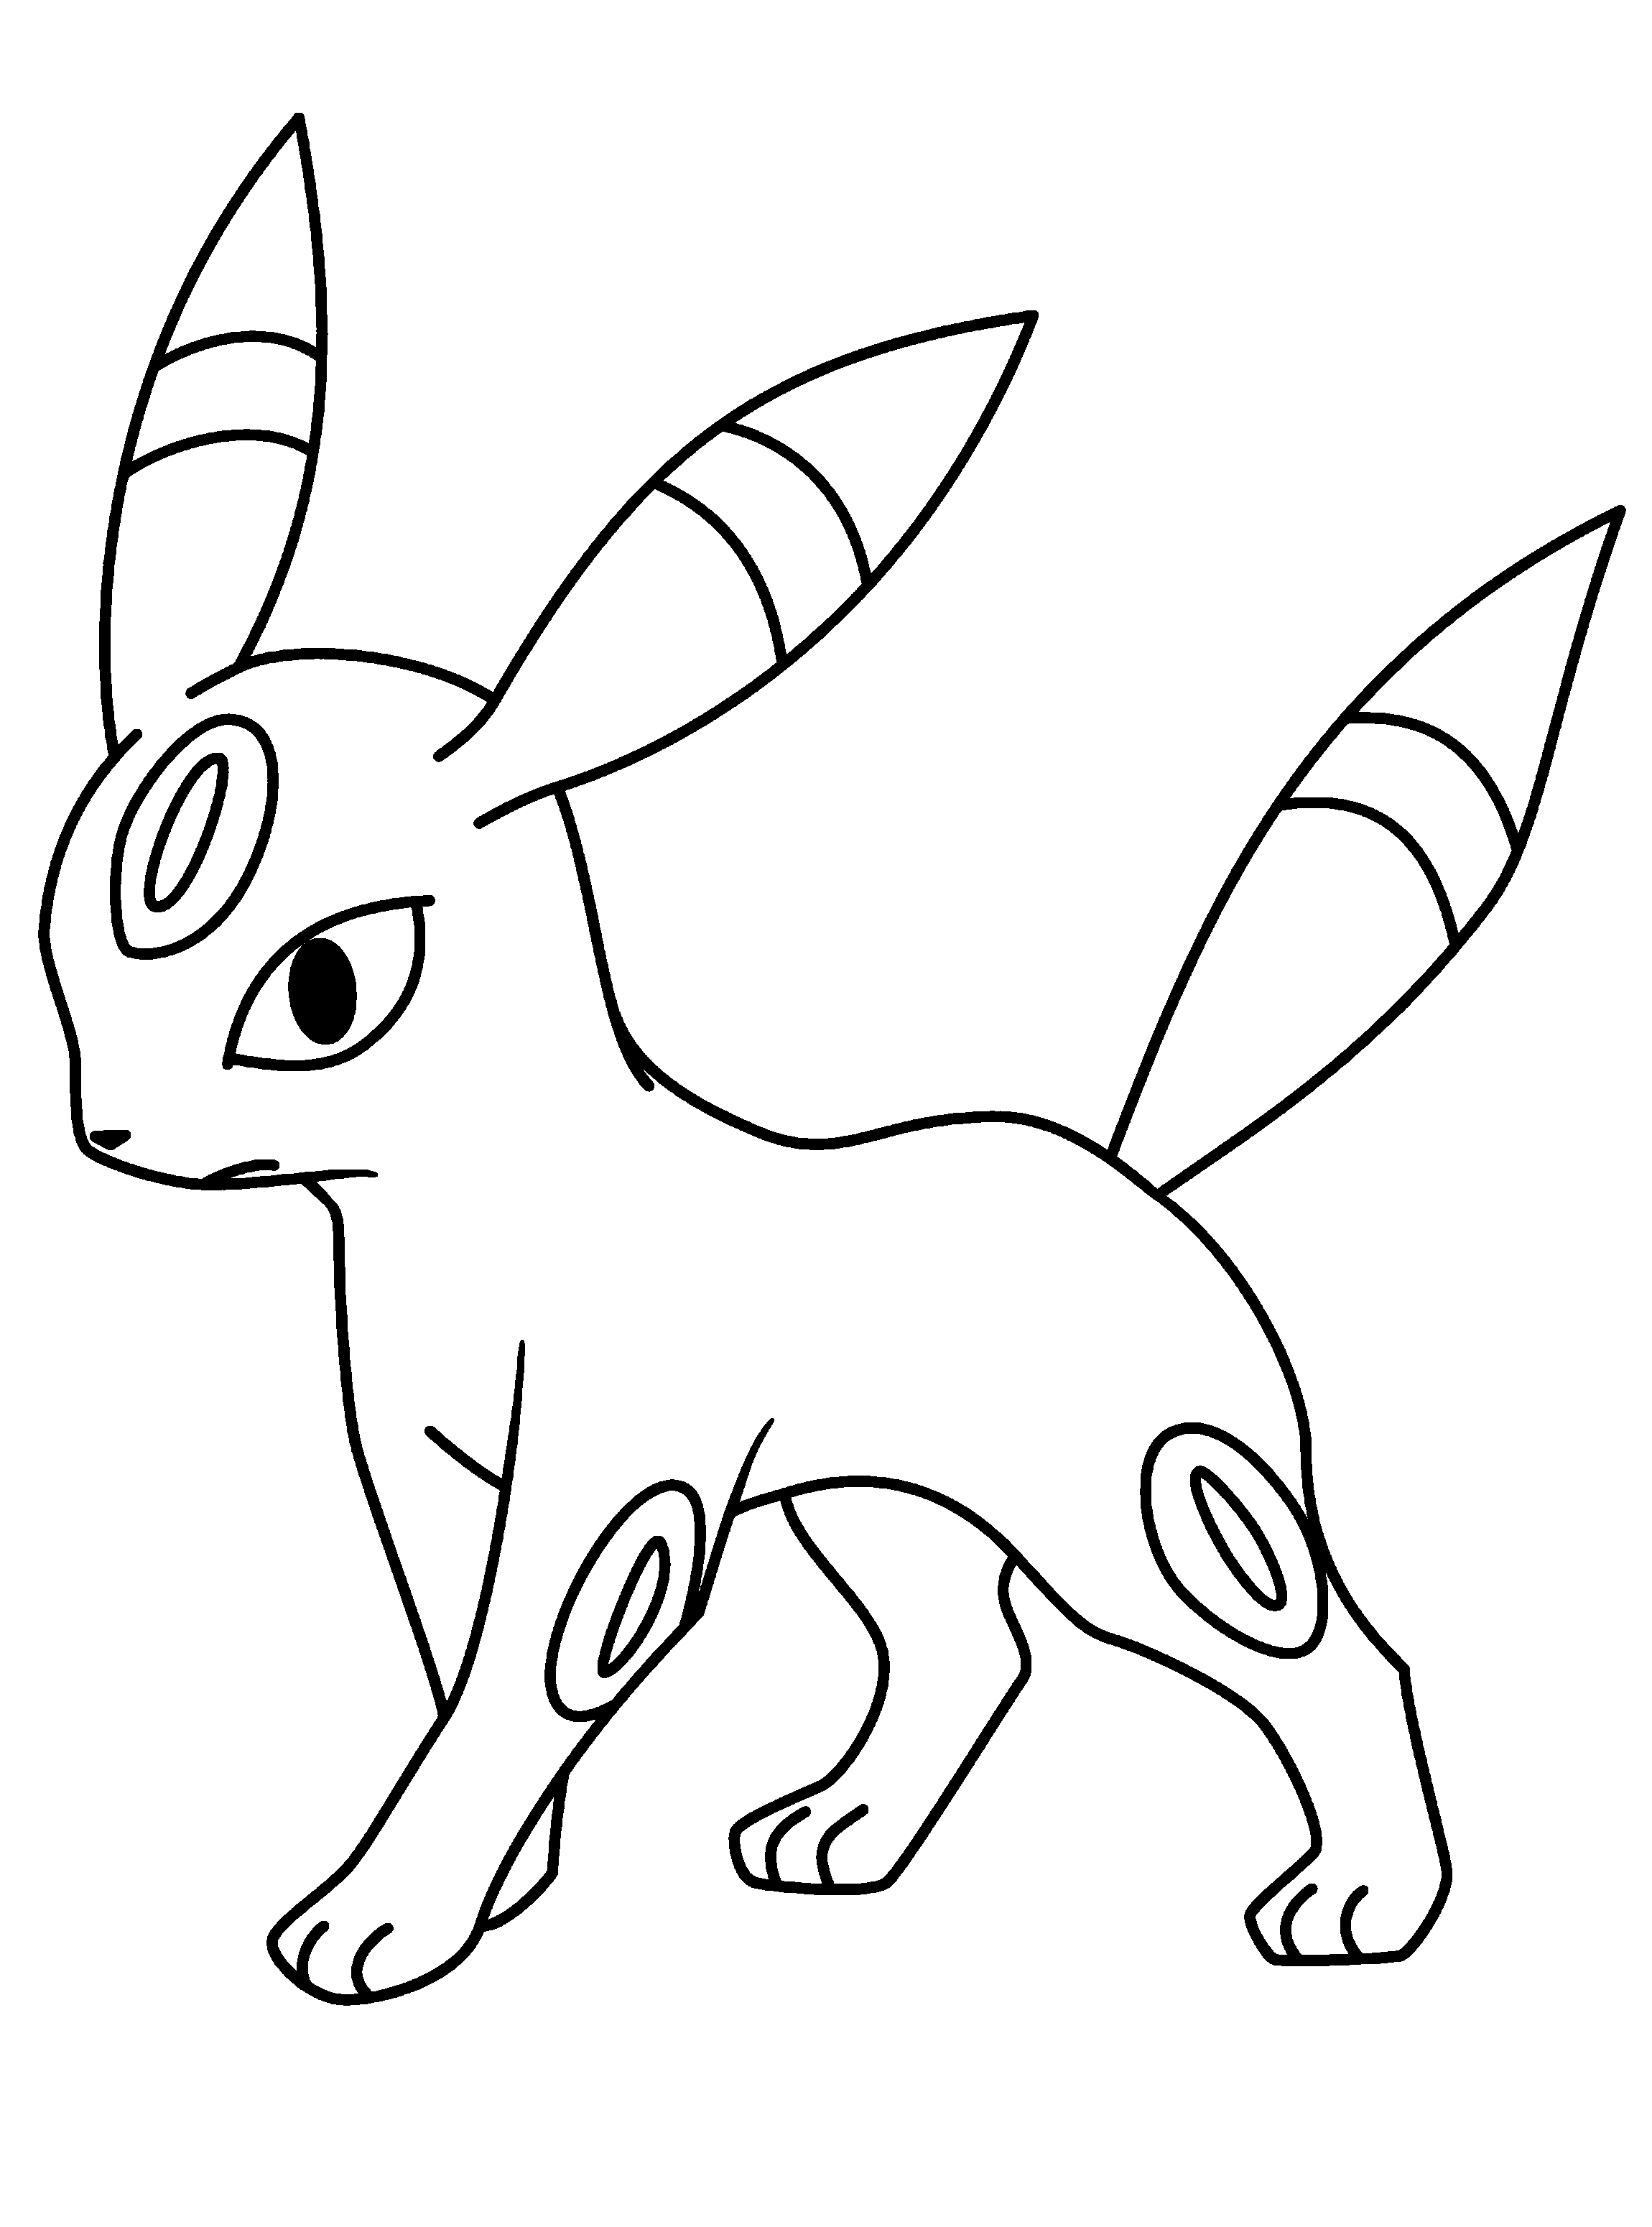 pokemon pictures of pokemon black and white pikachu clipart free download best pikachu clipart on black white pictures pokemon pokemon and of 